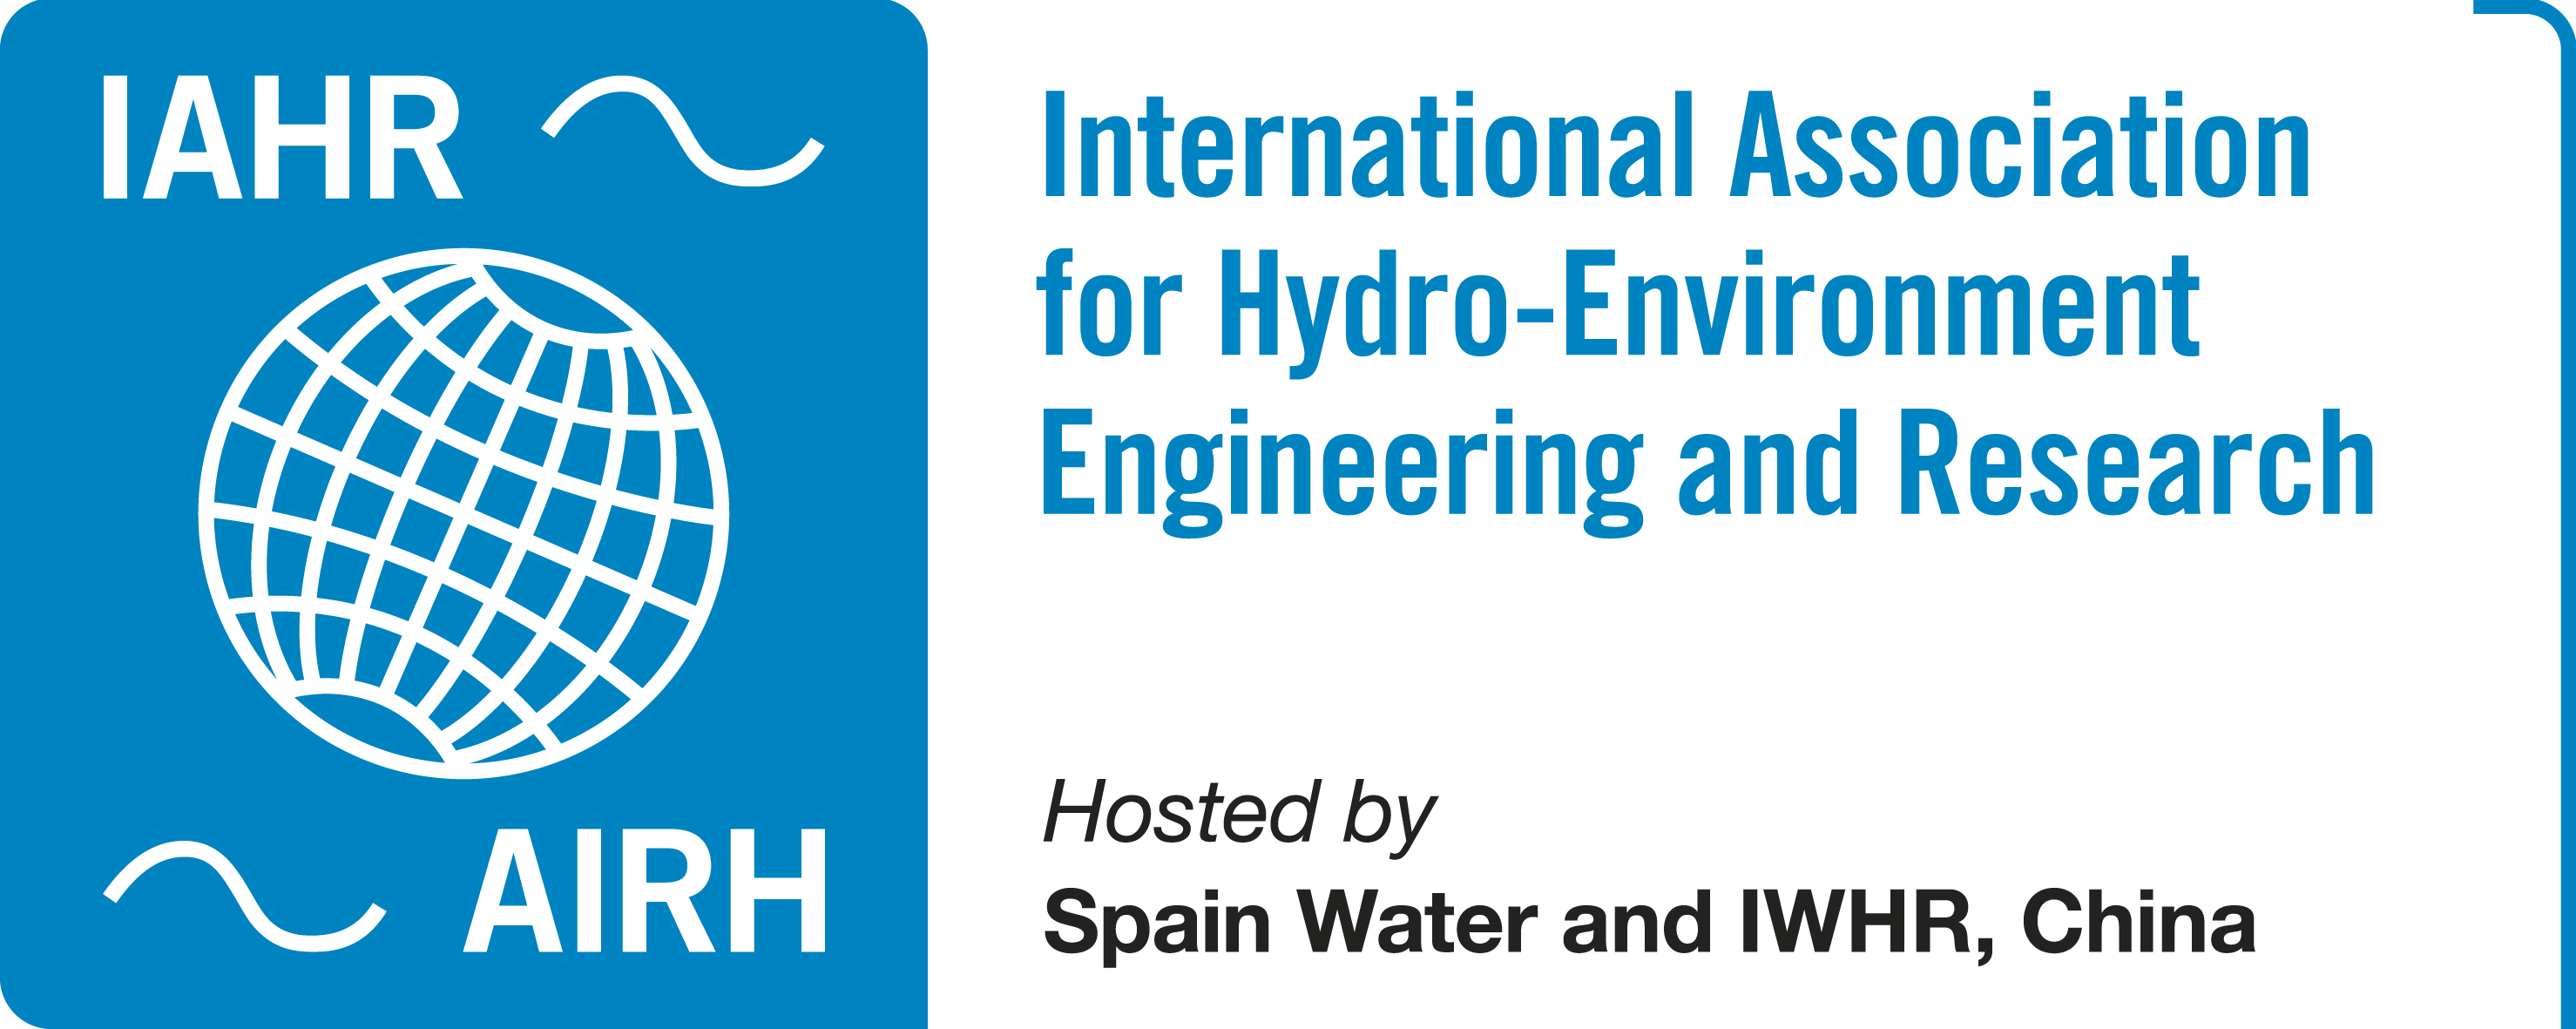 Hydrolink MagazineHydrolink is the primary magazine of the IAHR community and one of the highest-rated member benefits. It brings you the latest...